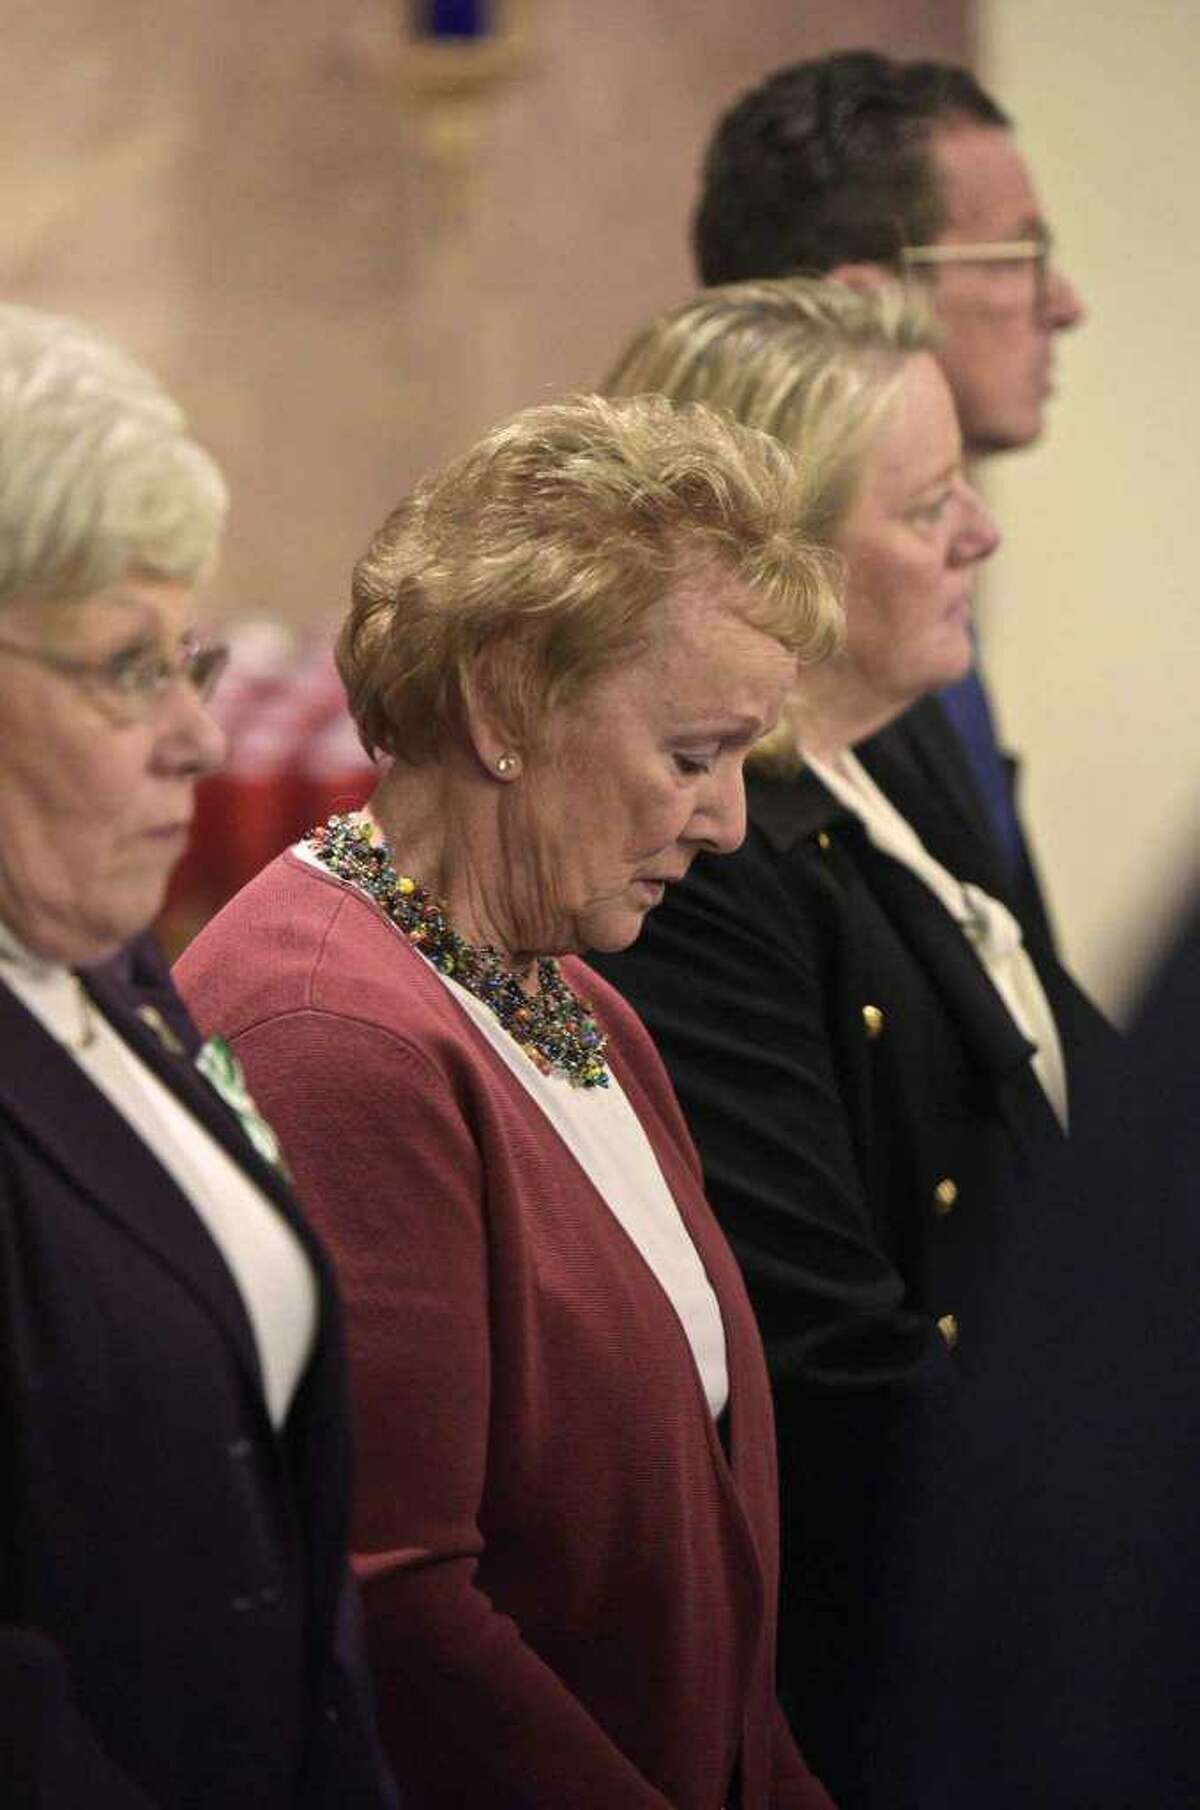 File Photo: Former Newtown First Selectman Pat llodra, center, bows her head as St. Rose of Lima, in Newtown, welcomed Bishop Frank Caggiano for a special mass on De. 14, 2017. The service was held on the fifth anniversary of the day 20 first-graders and six educators were killed at Sandy Hook Elementary School. With Llodra are former Lt. Governor Nancy Lyman, left, and former Gov. Dannel Malloy and his wife Cathy Malloy.